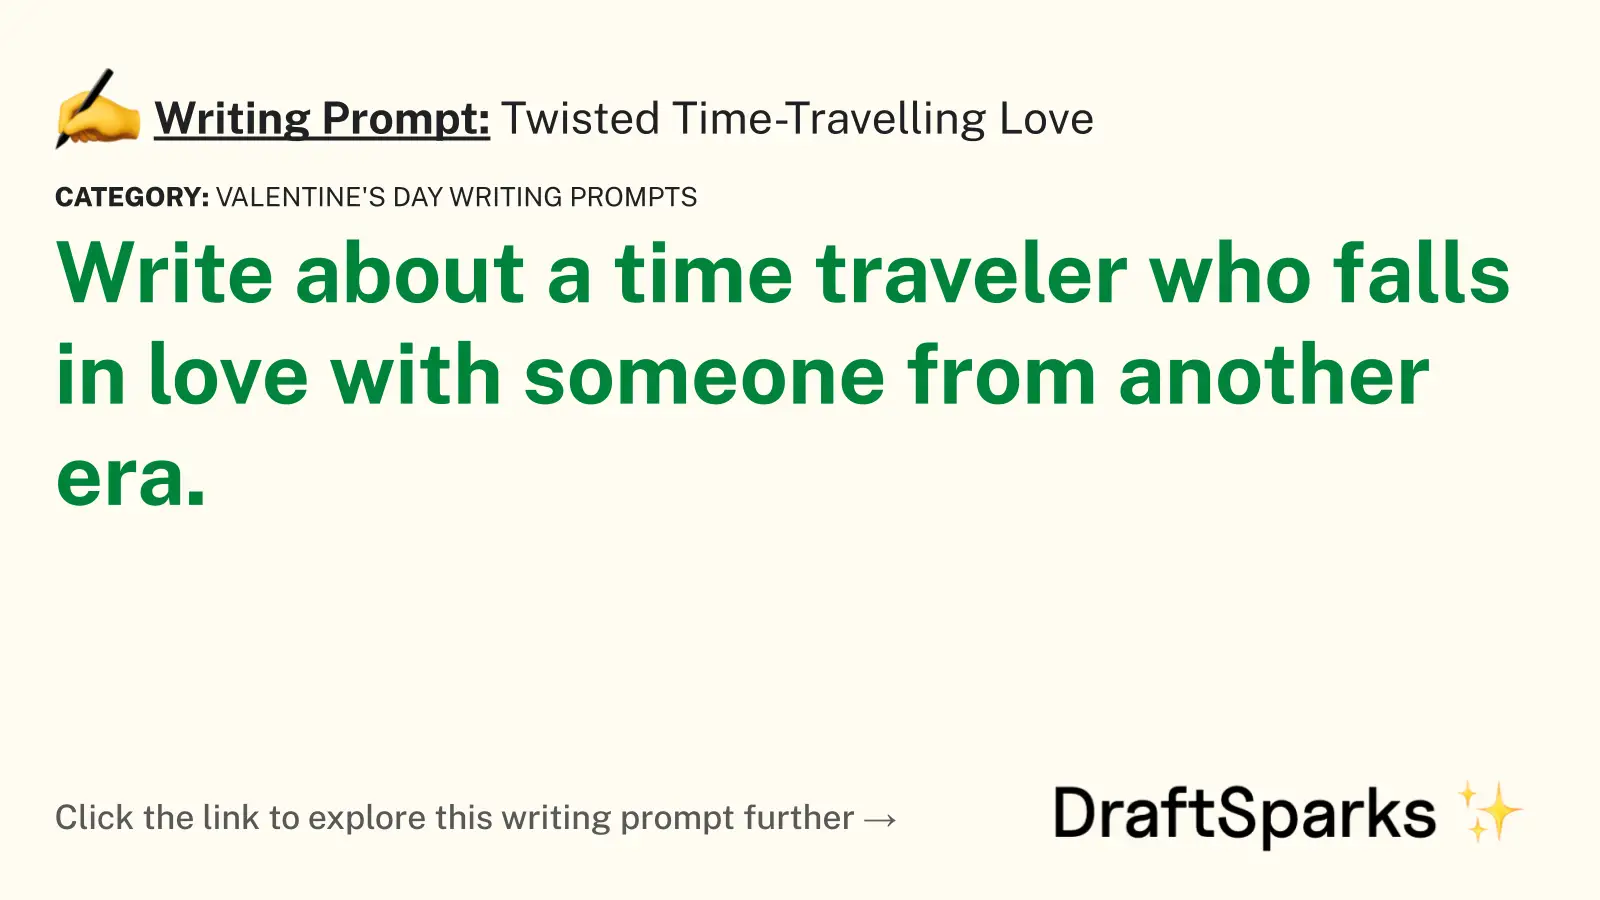 Twisted Time-Travelling Love